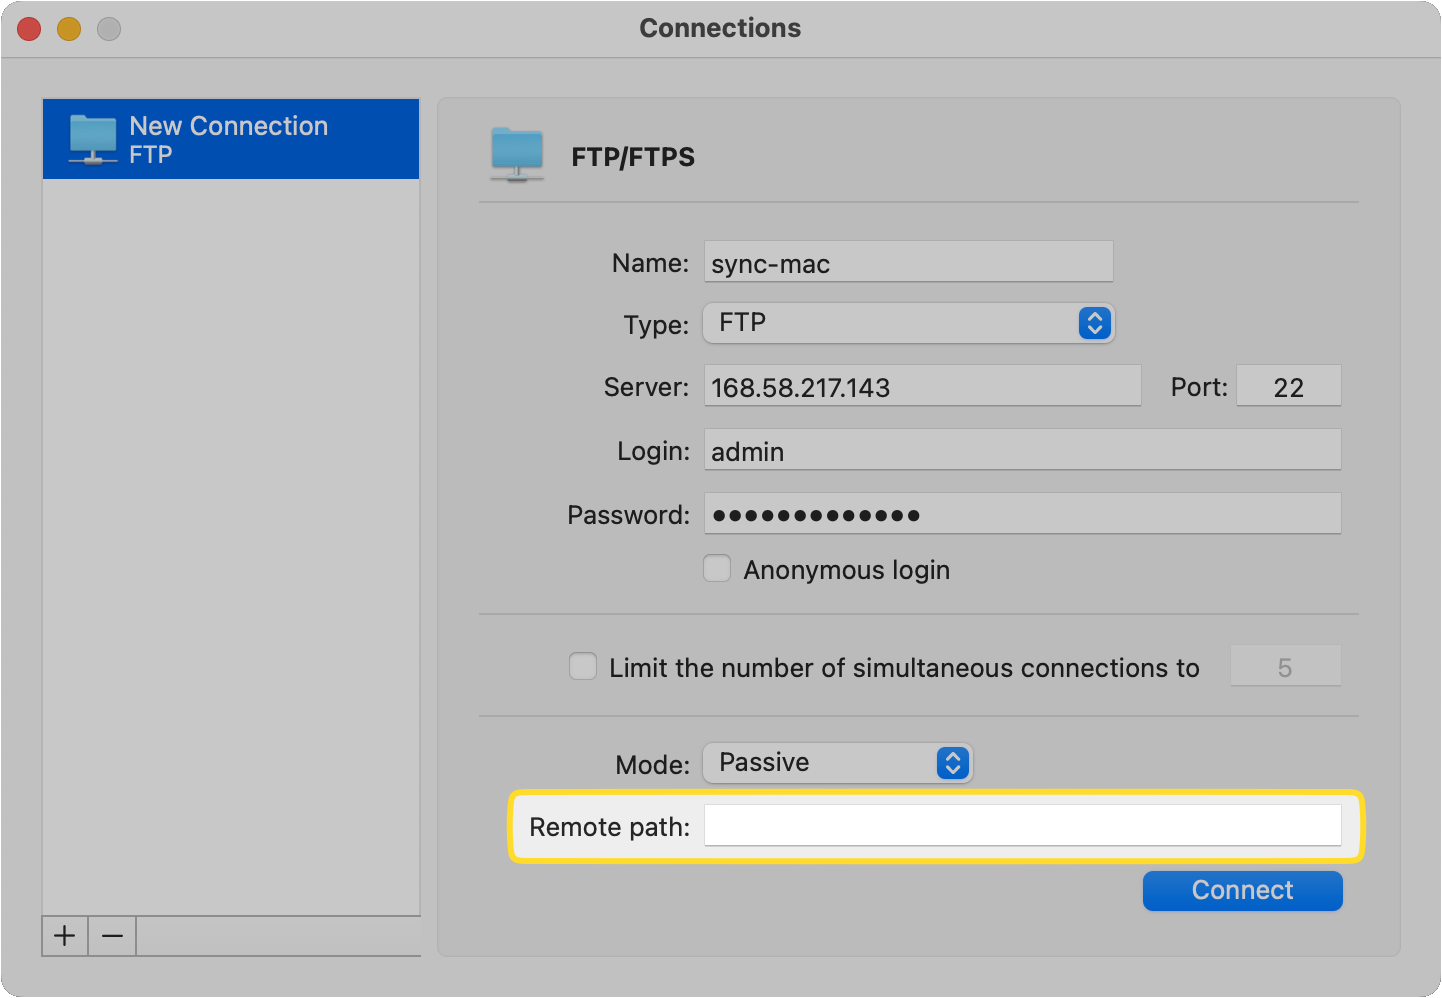 The Remote path field of the new FTP connection is demonstrated